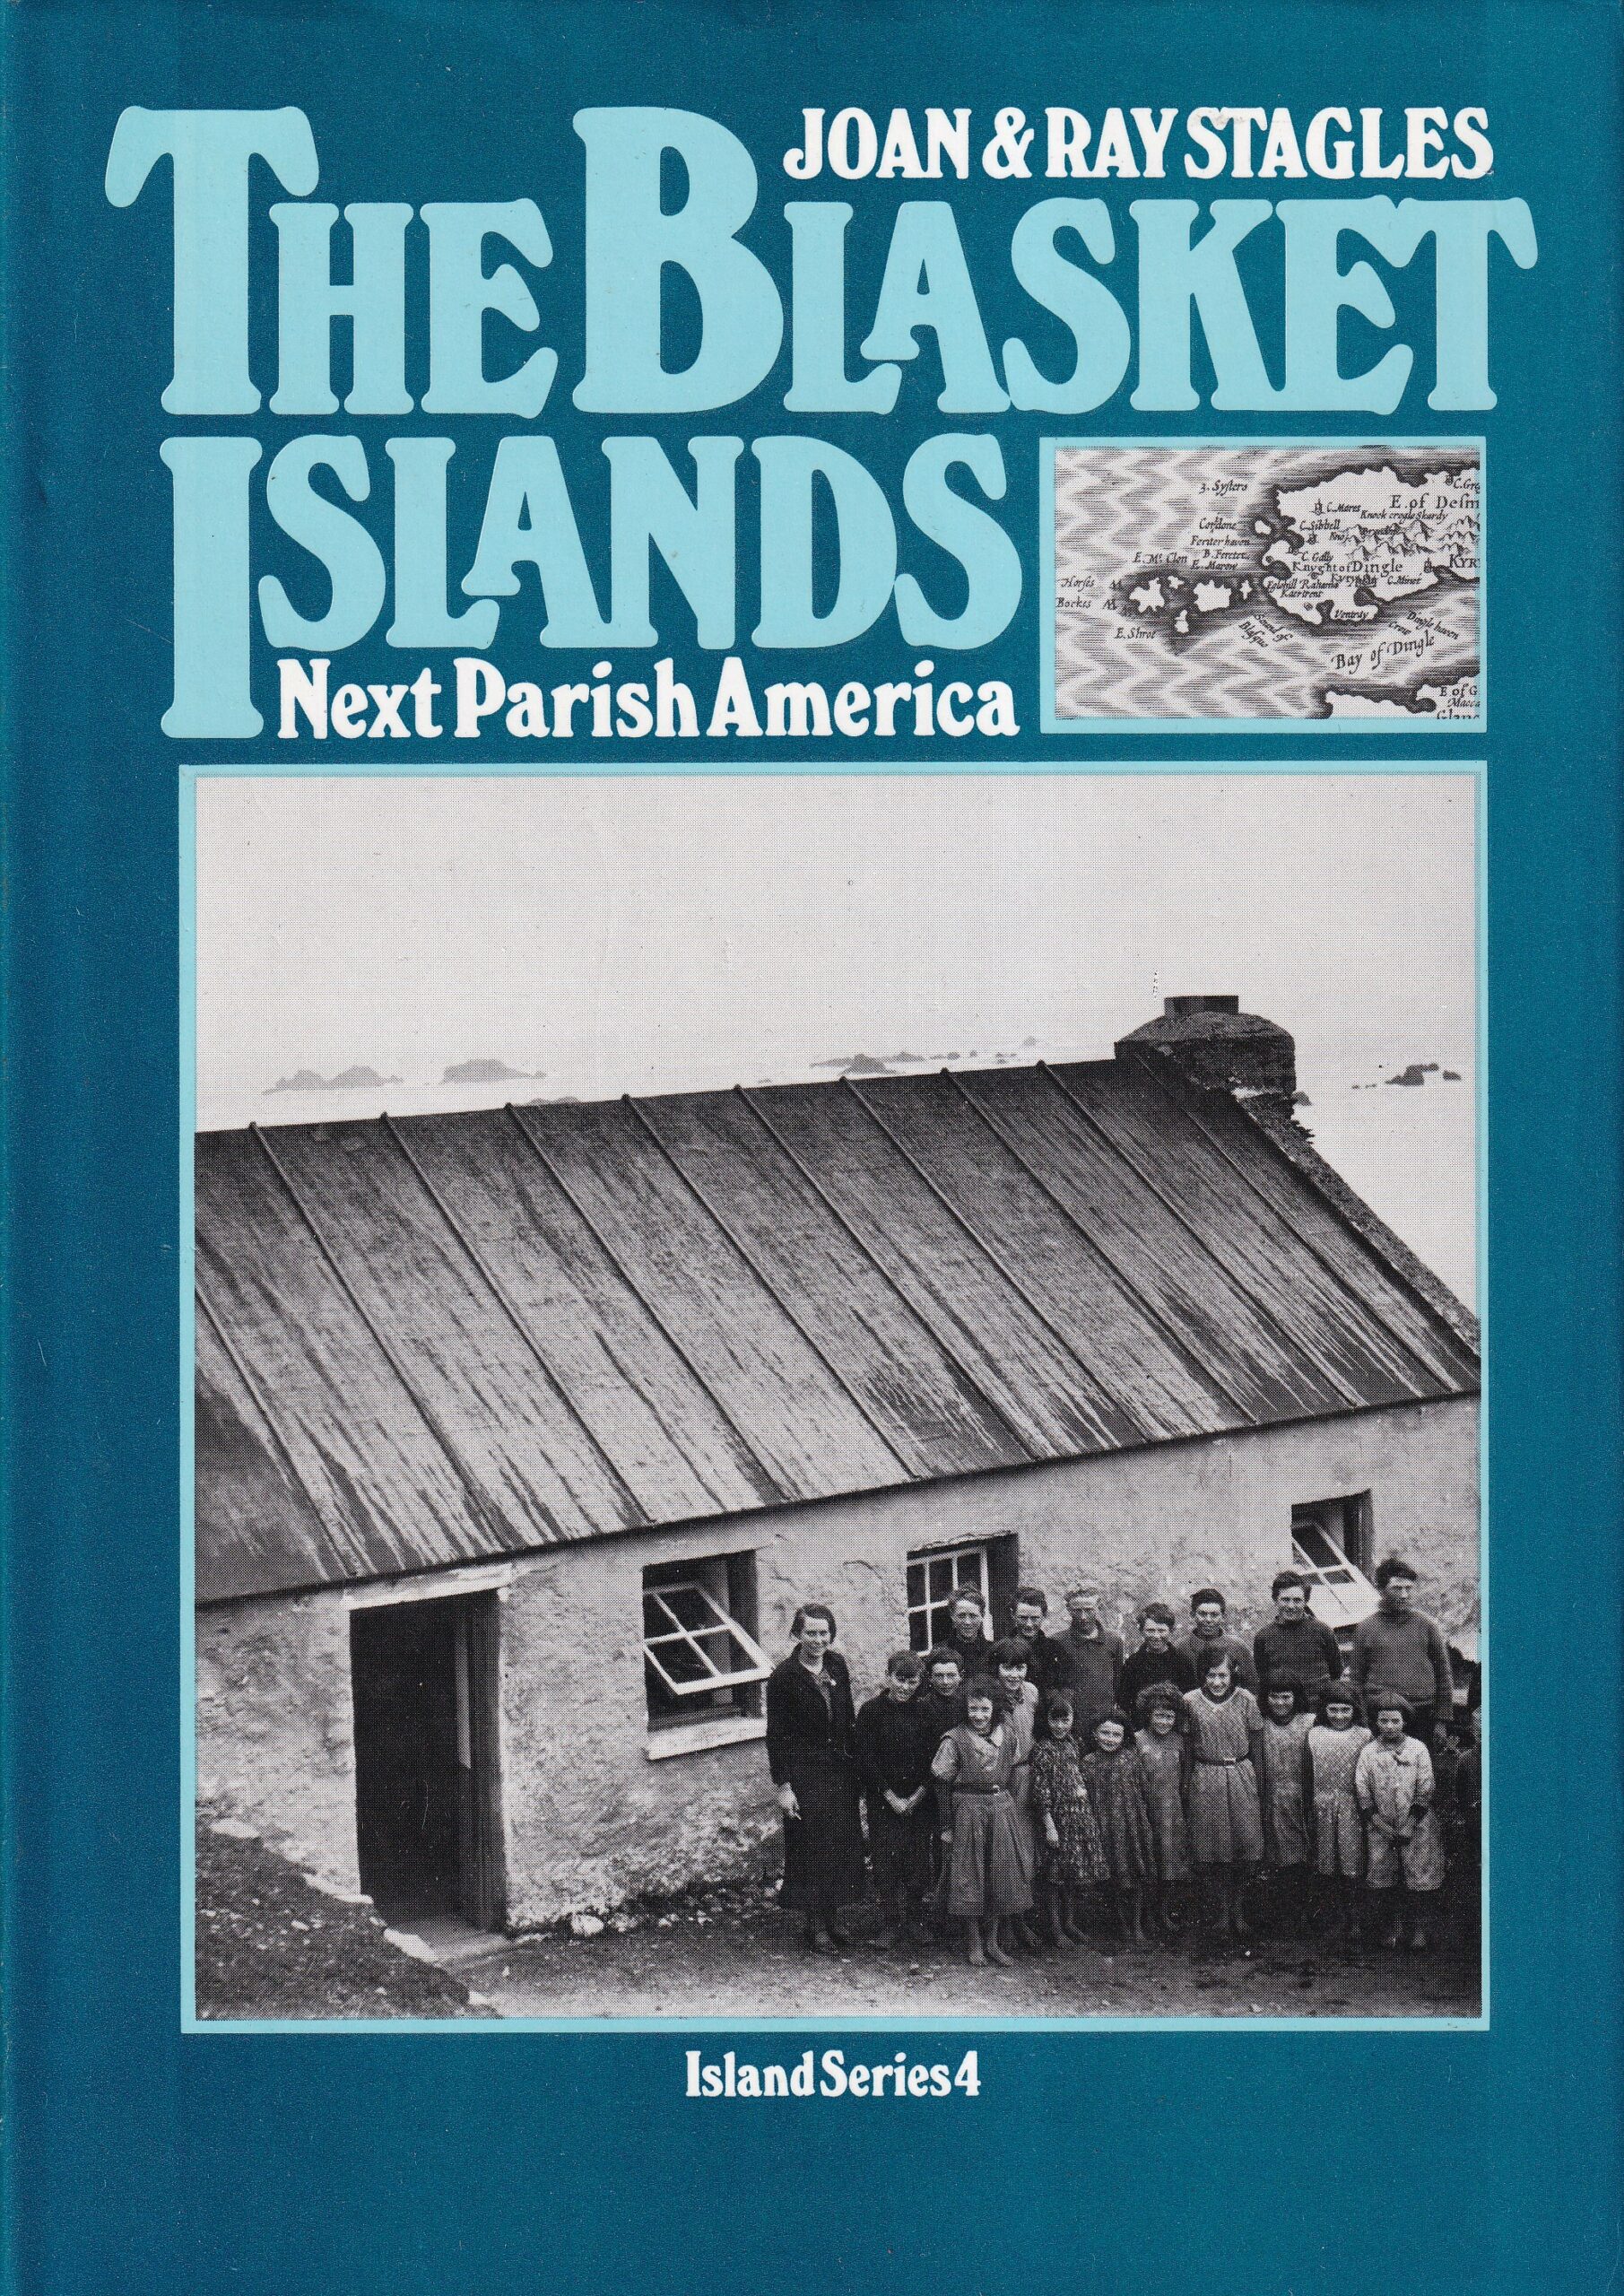 The Blasket Islands: Next Parish America by Joan and Ray Stagles